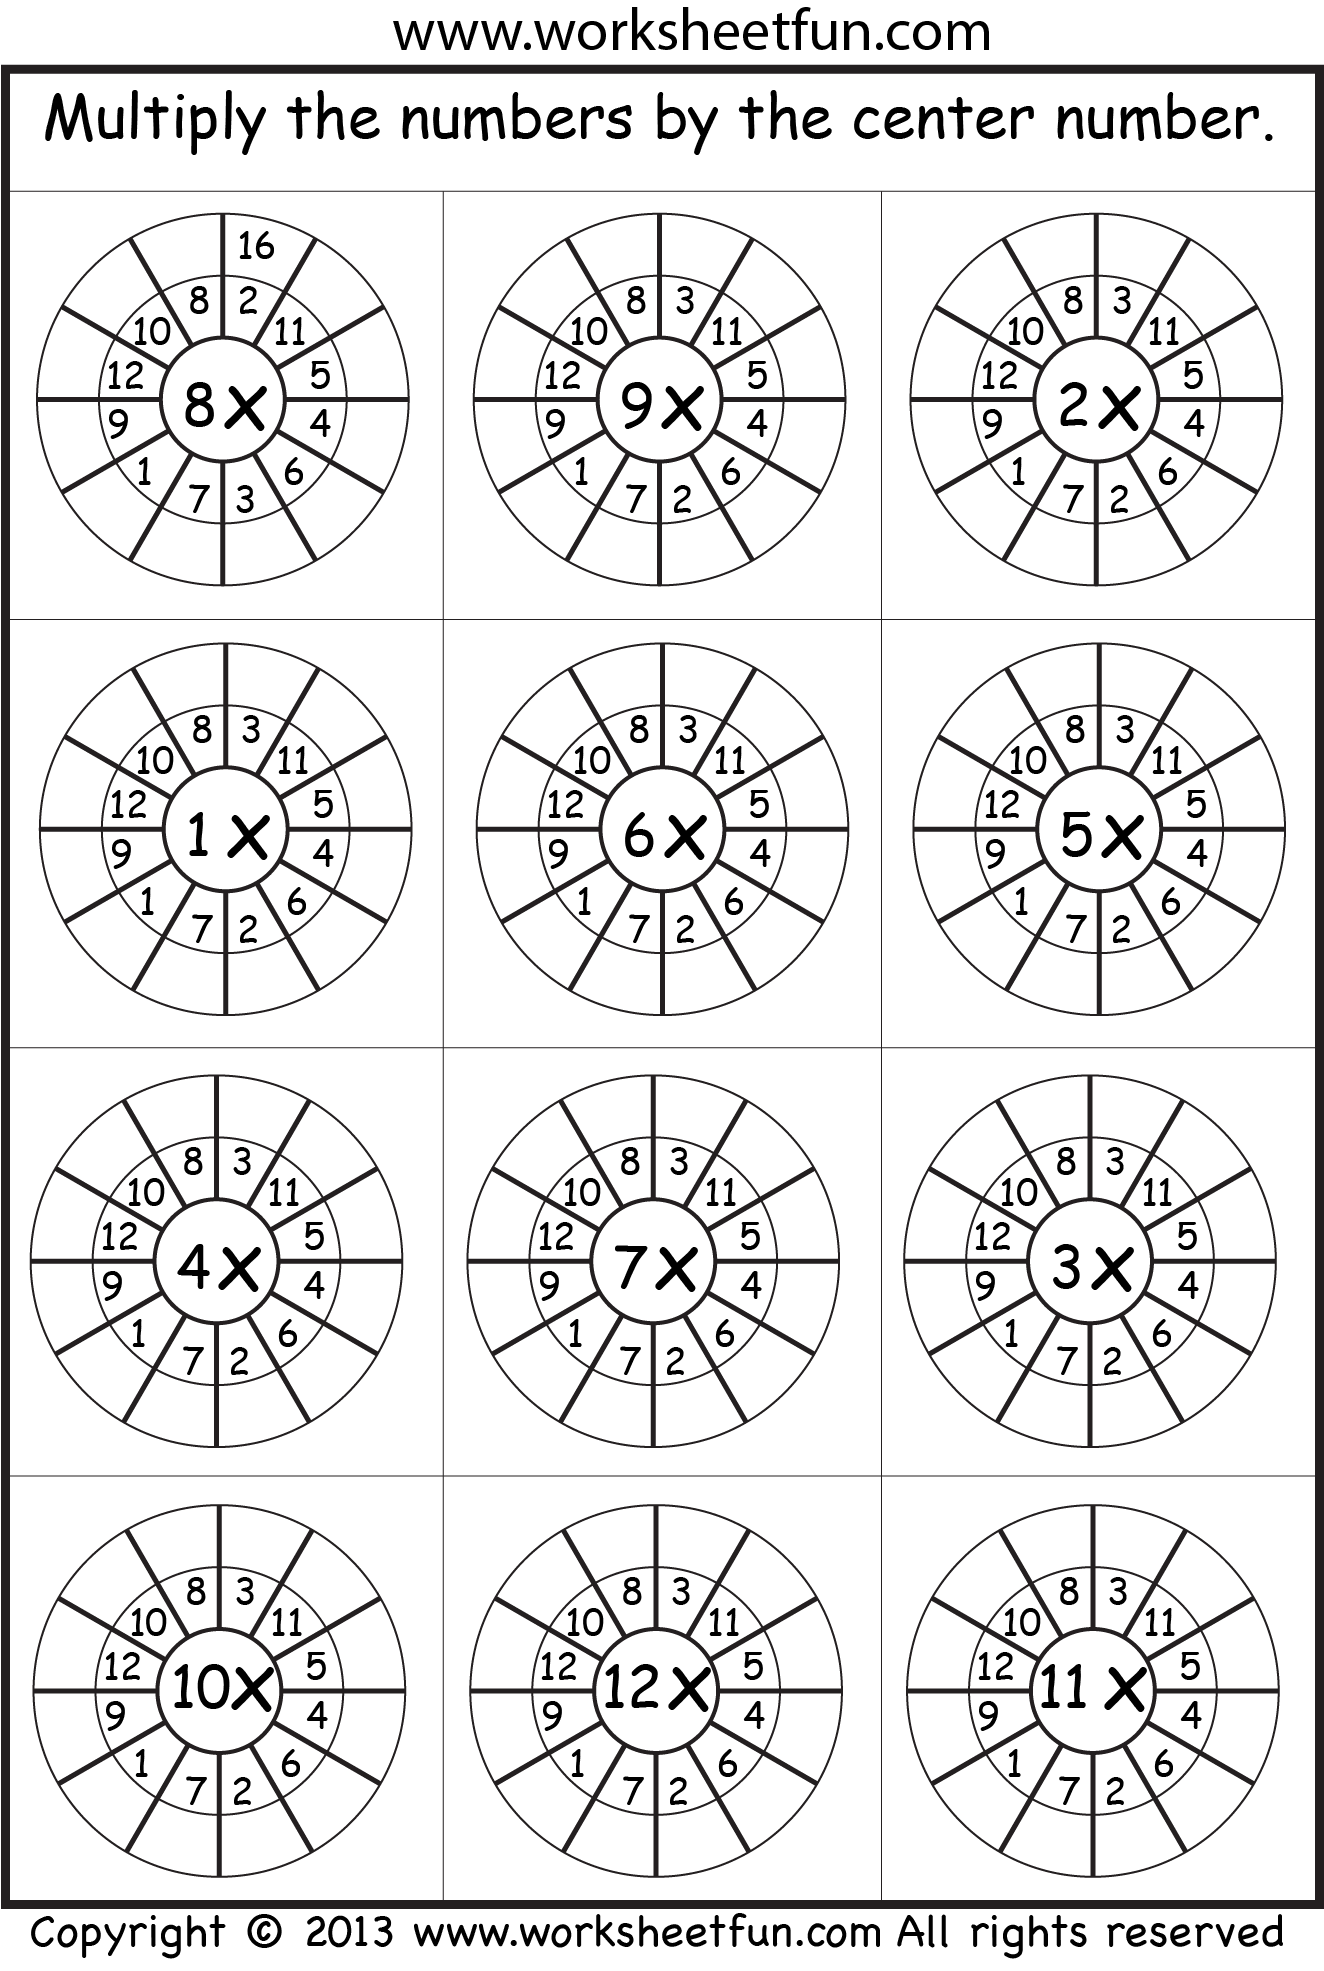 Times Table Worksheets 1 2 3 4 5 6 7 8 9 10 11 12 13 14 15 16 17 18 19 And 